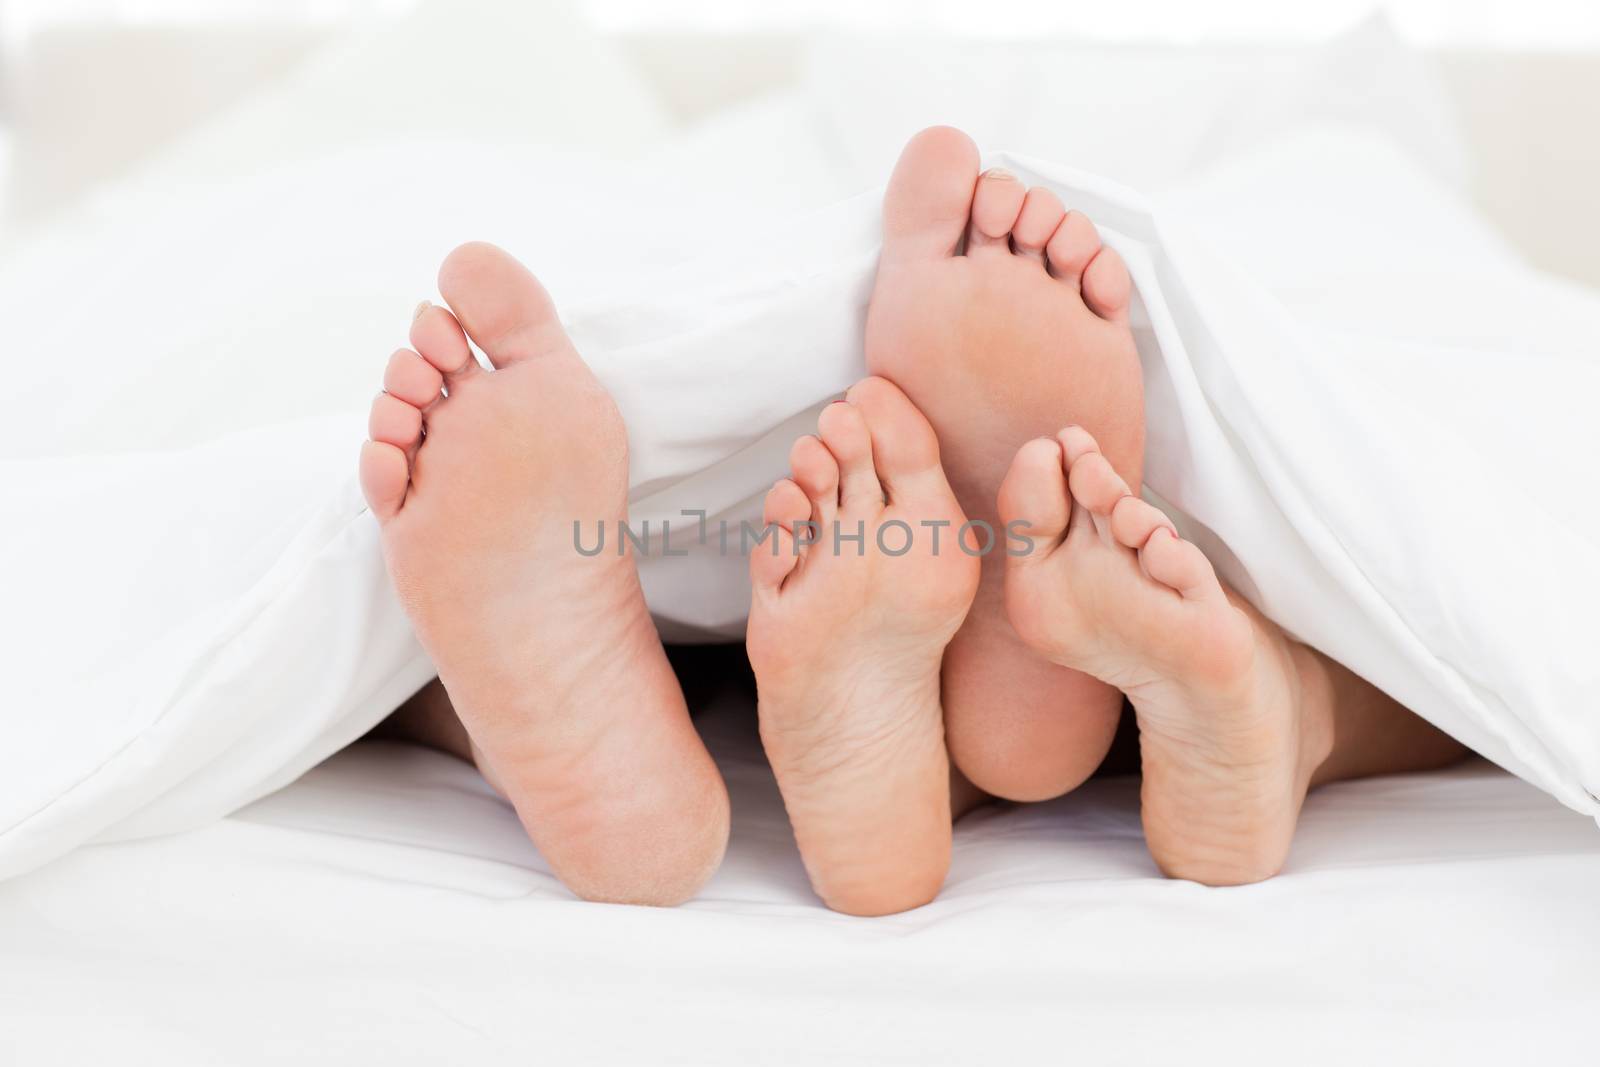 Two members of a family showing their feet while lying on a bed